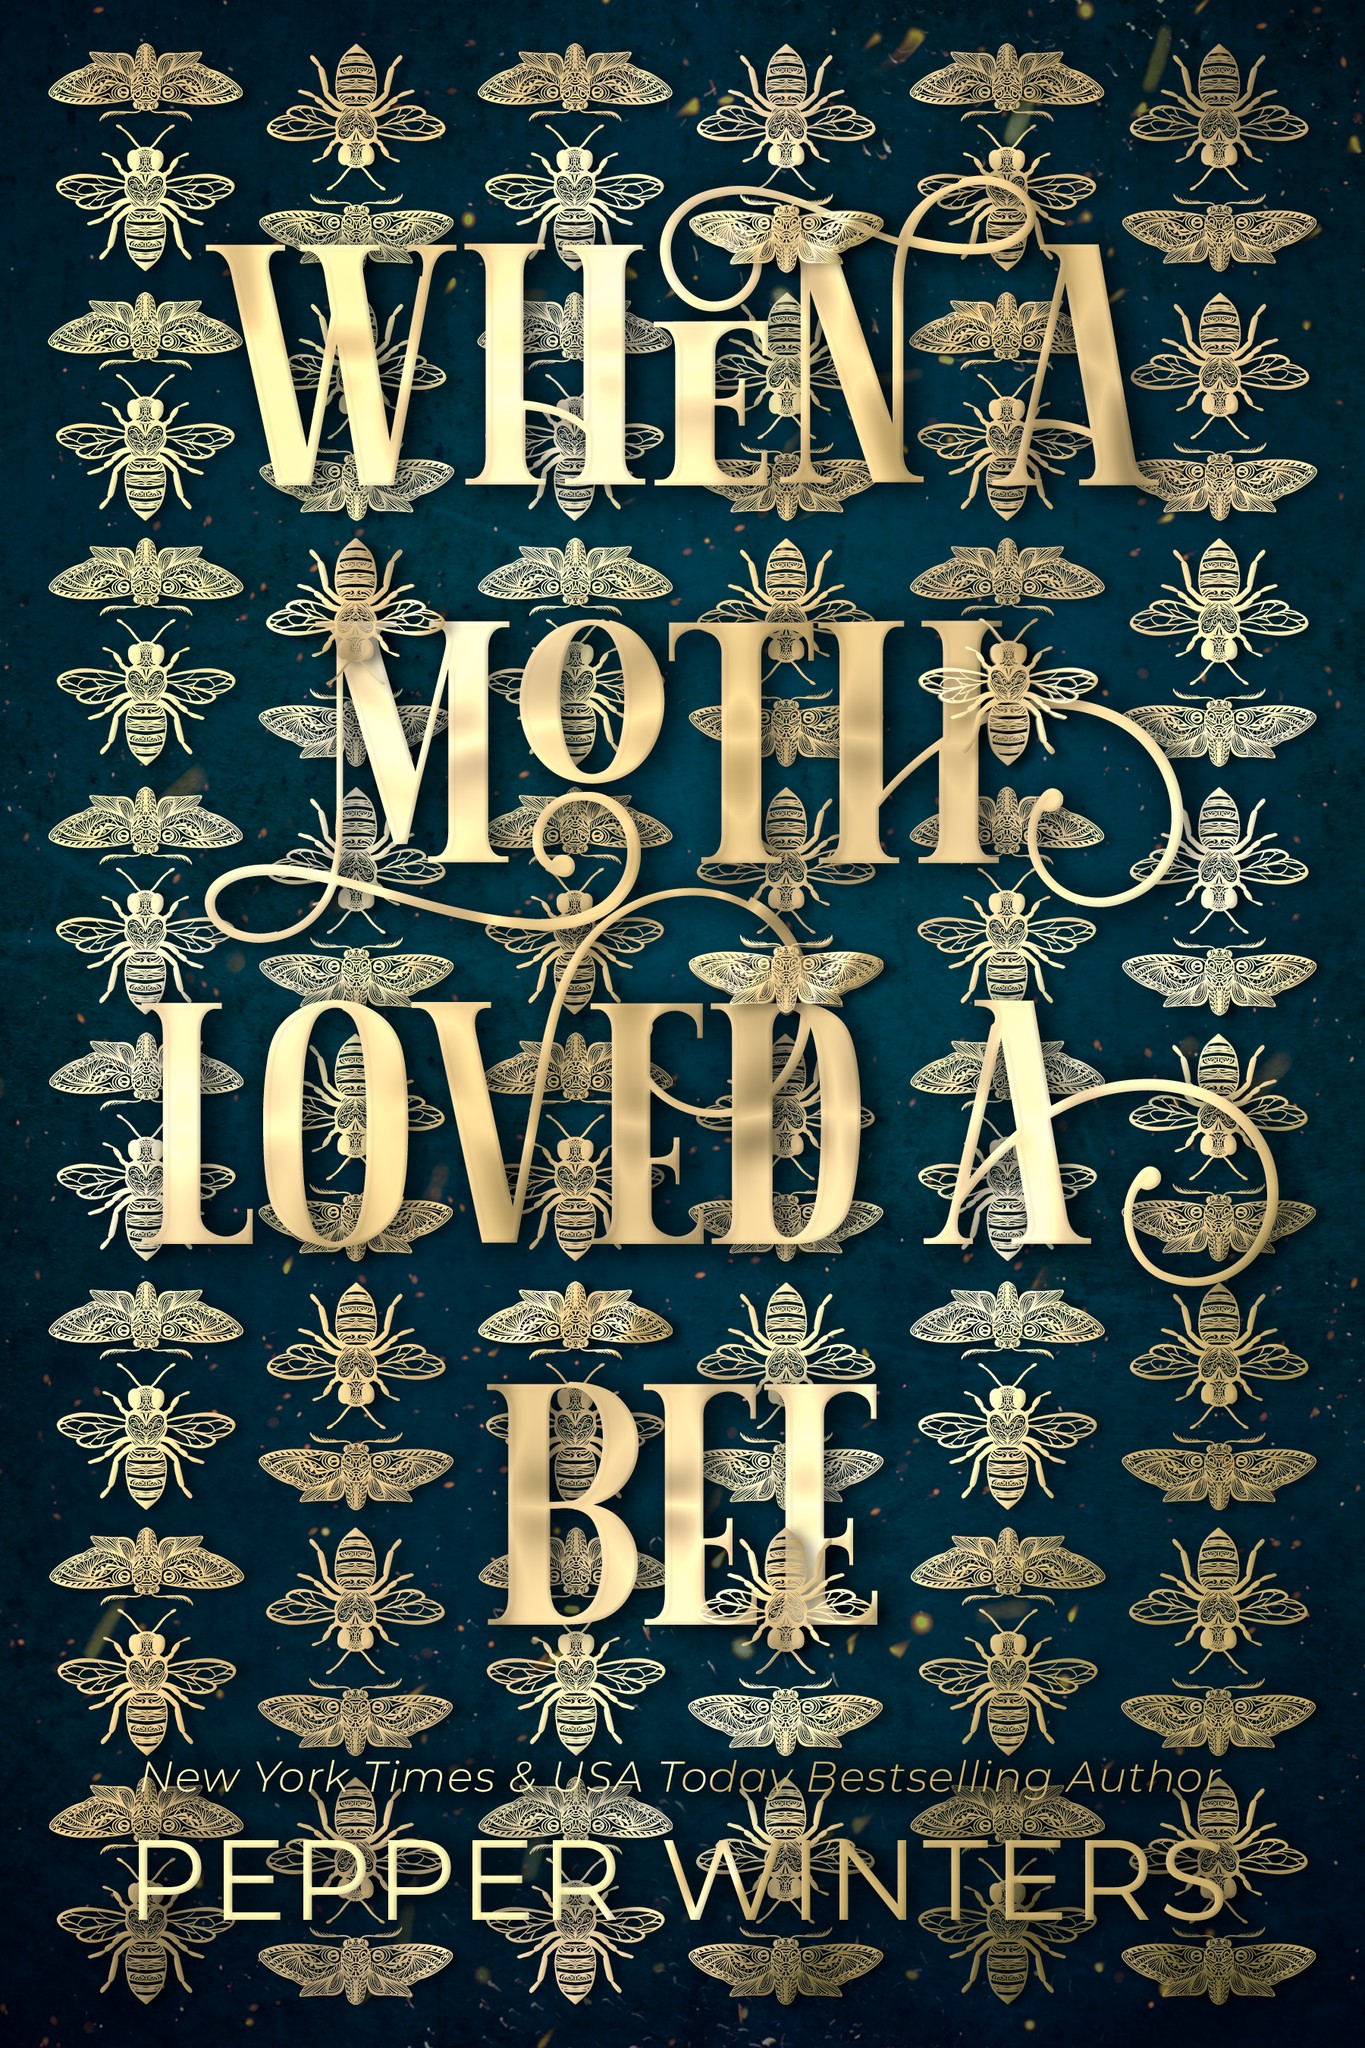 When a Moth Loved a Bee by Pepper Winters PDF Download